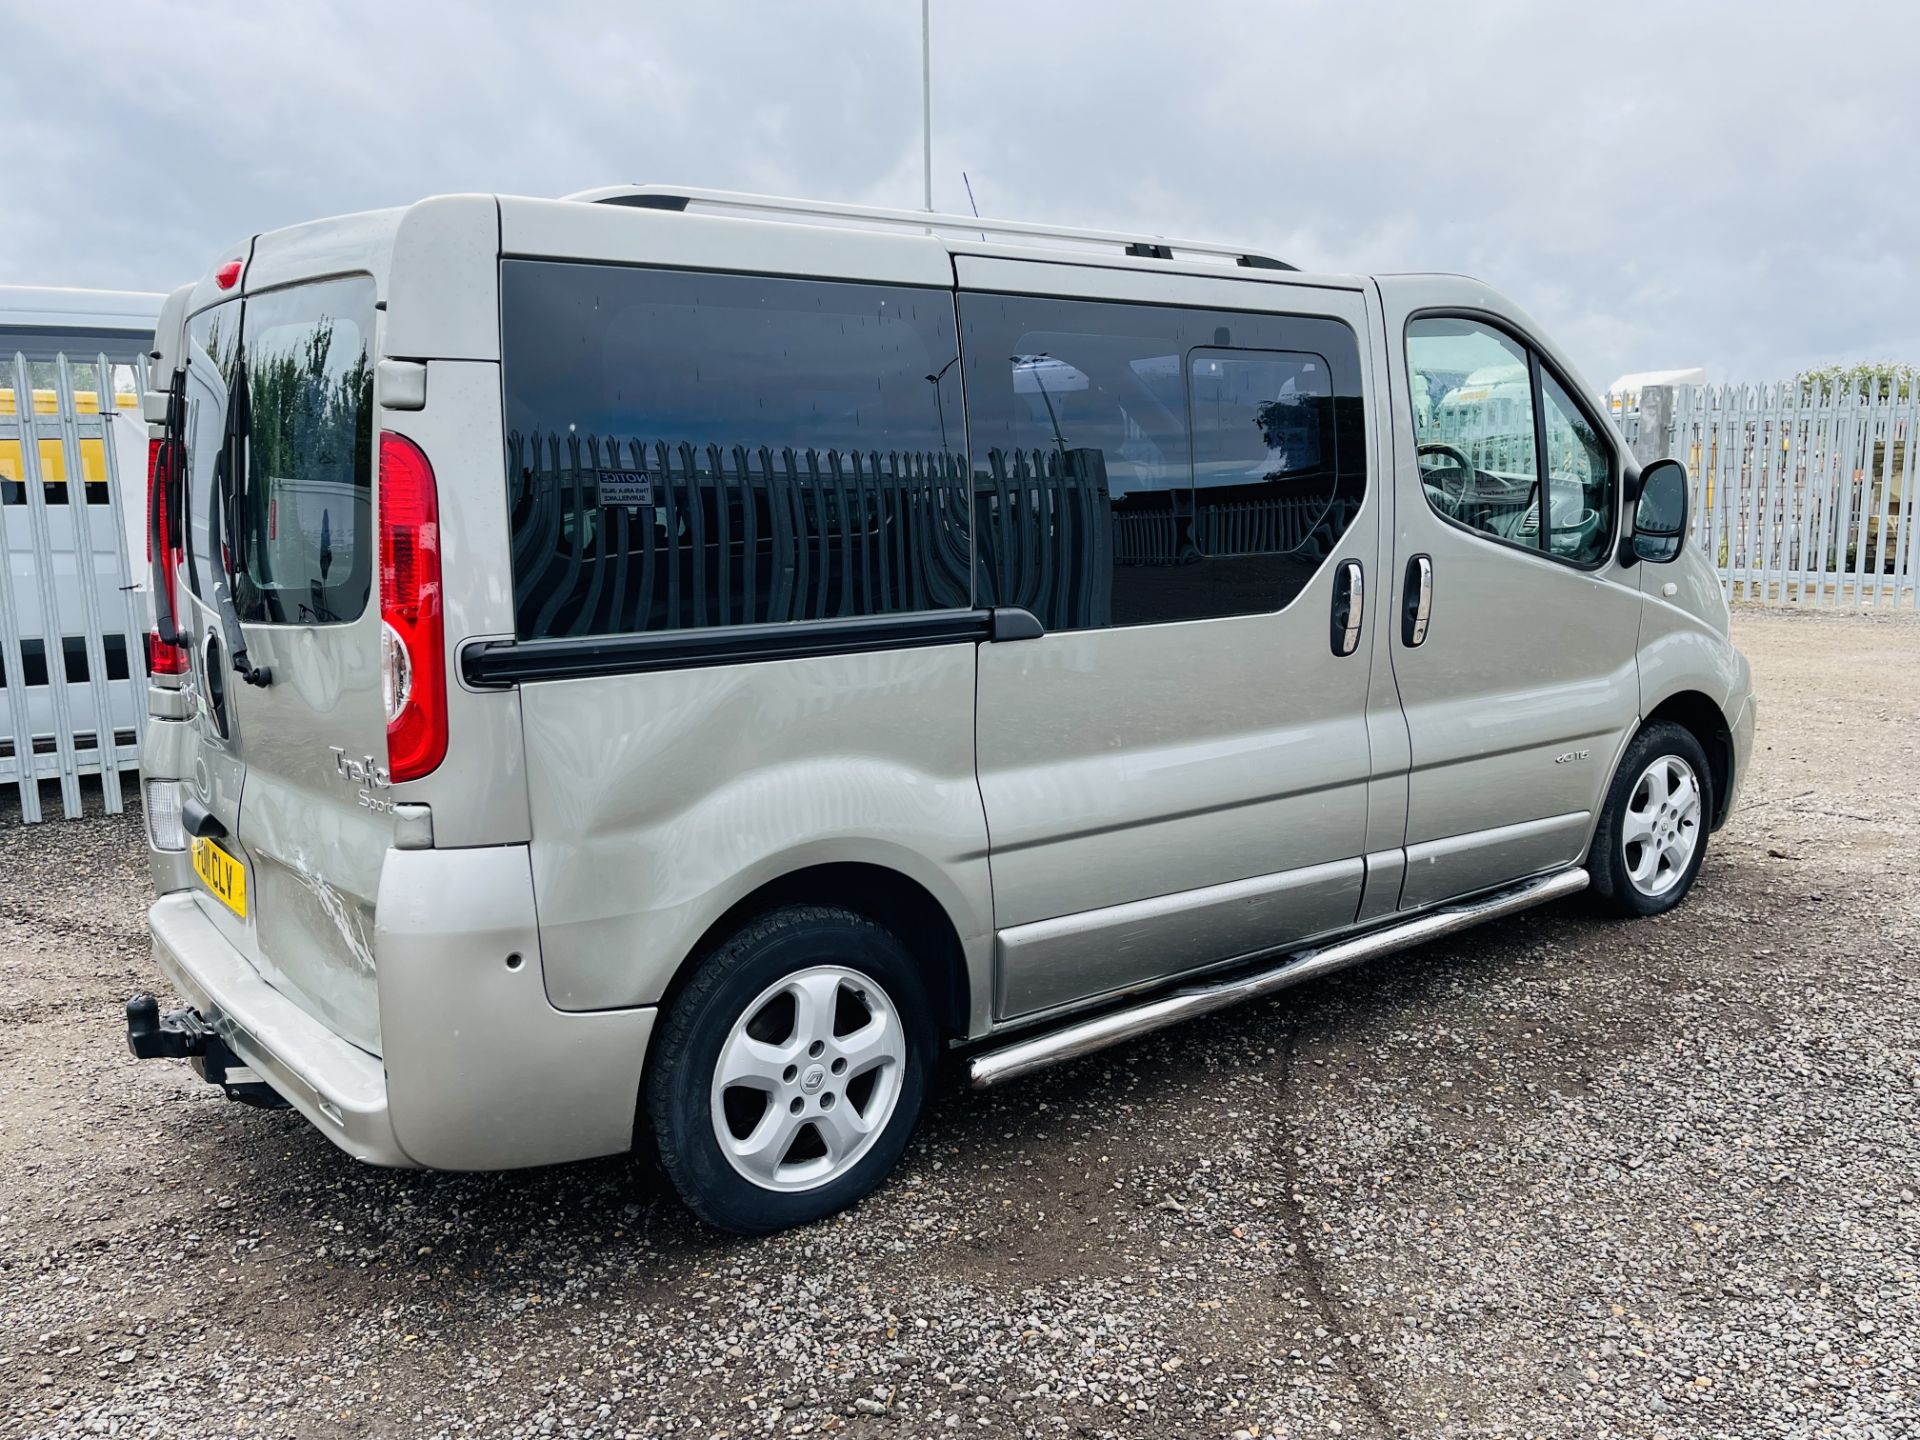 ** ON SALE ** Renault Trafic 2.0 DCI SL27 Sport 115 2011 '11 Reg' - Air Con - No Vat Save 20% - Image 14 of 20